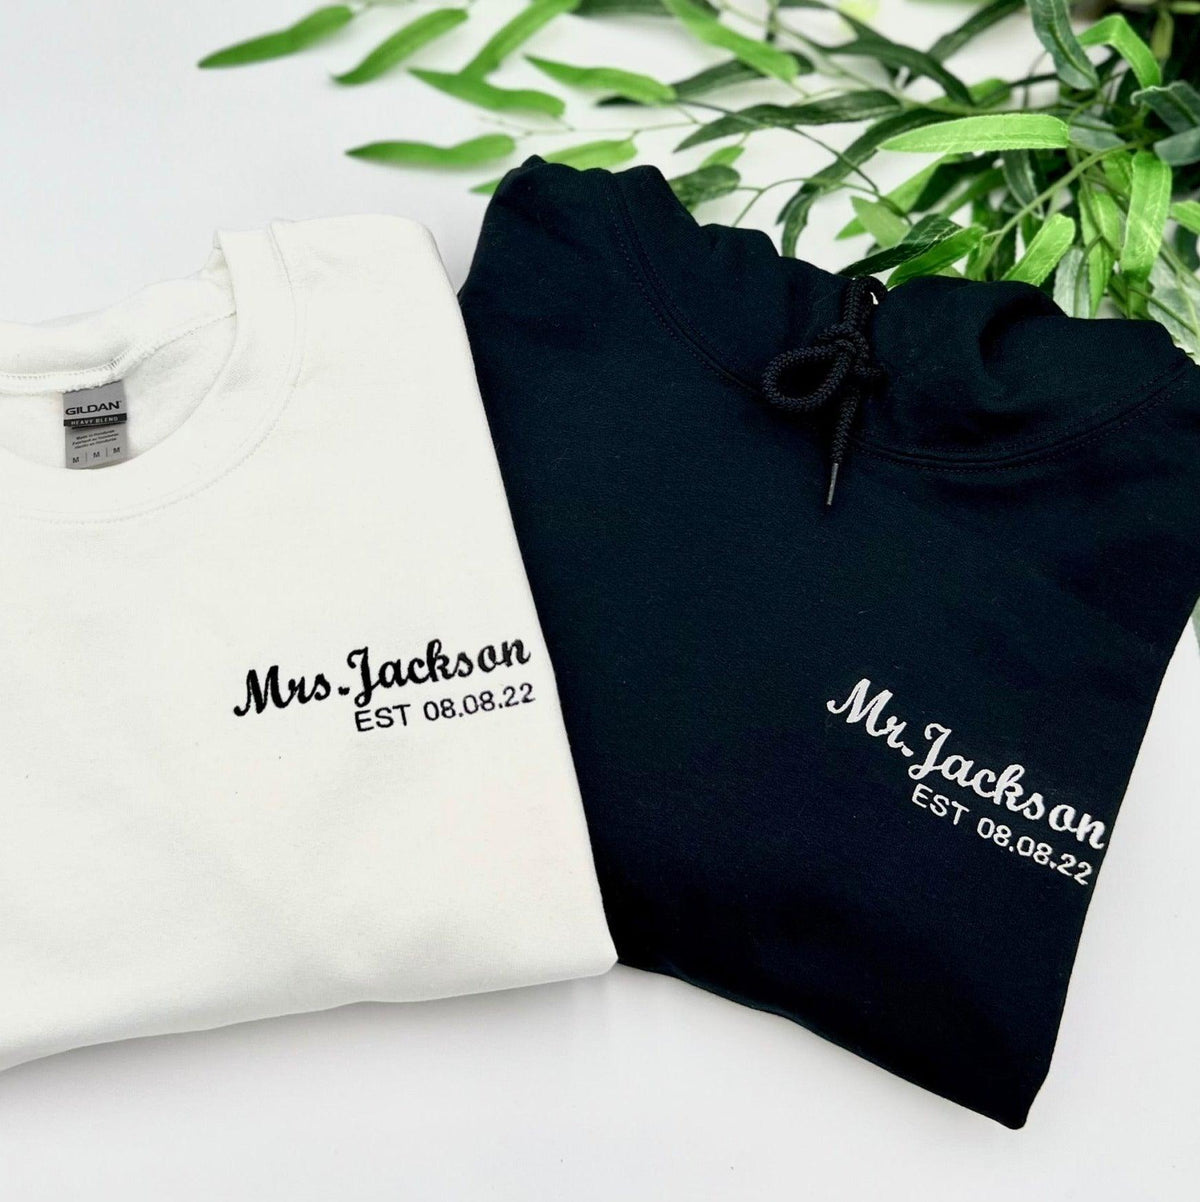 Custom Embroidered Sweatshirts For Couples, Custom Mr And Mrs Embroidered Anniversary Date Couples Sweatshirt